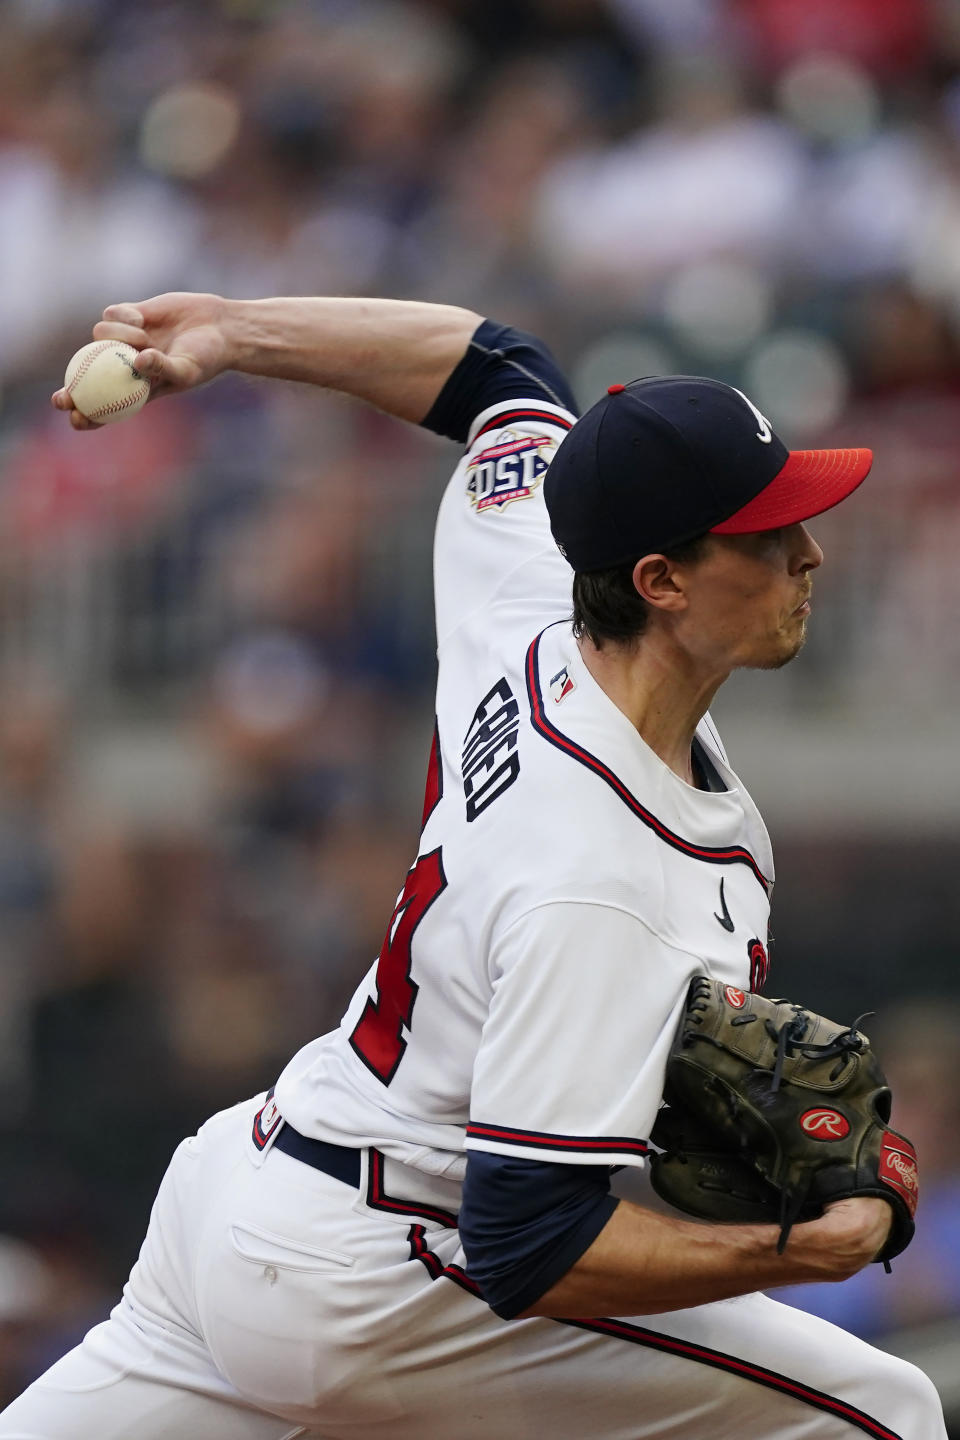 Atlanta Braves starting pitcher Max Fried works against the New York Mets during the second inning of a baseball game Wednesday, June 30, 2021, in Atlanta. (AP Photo/John Bazemore)